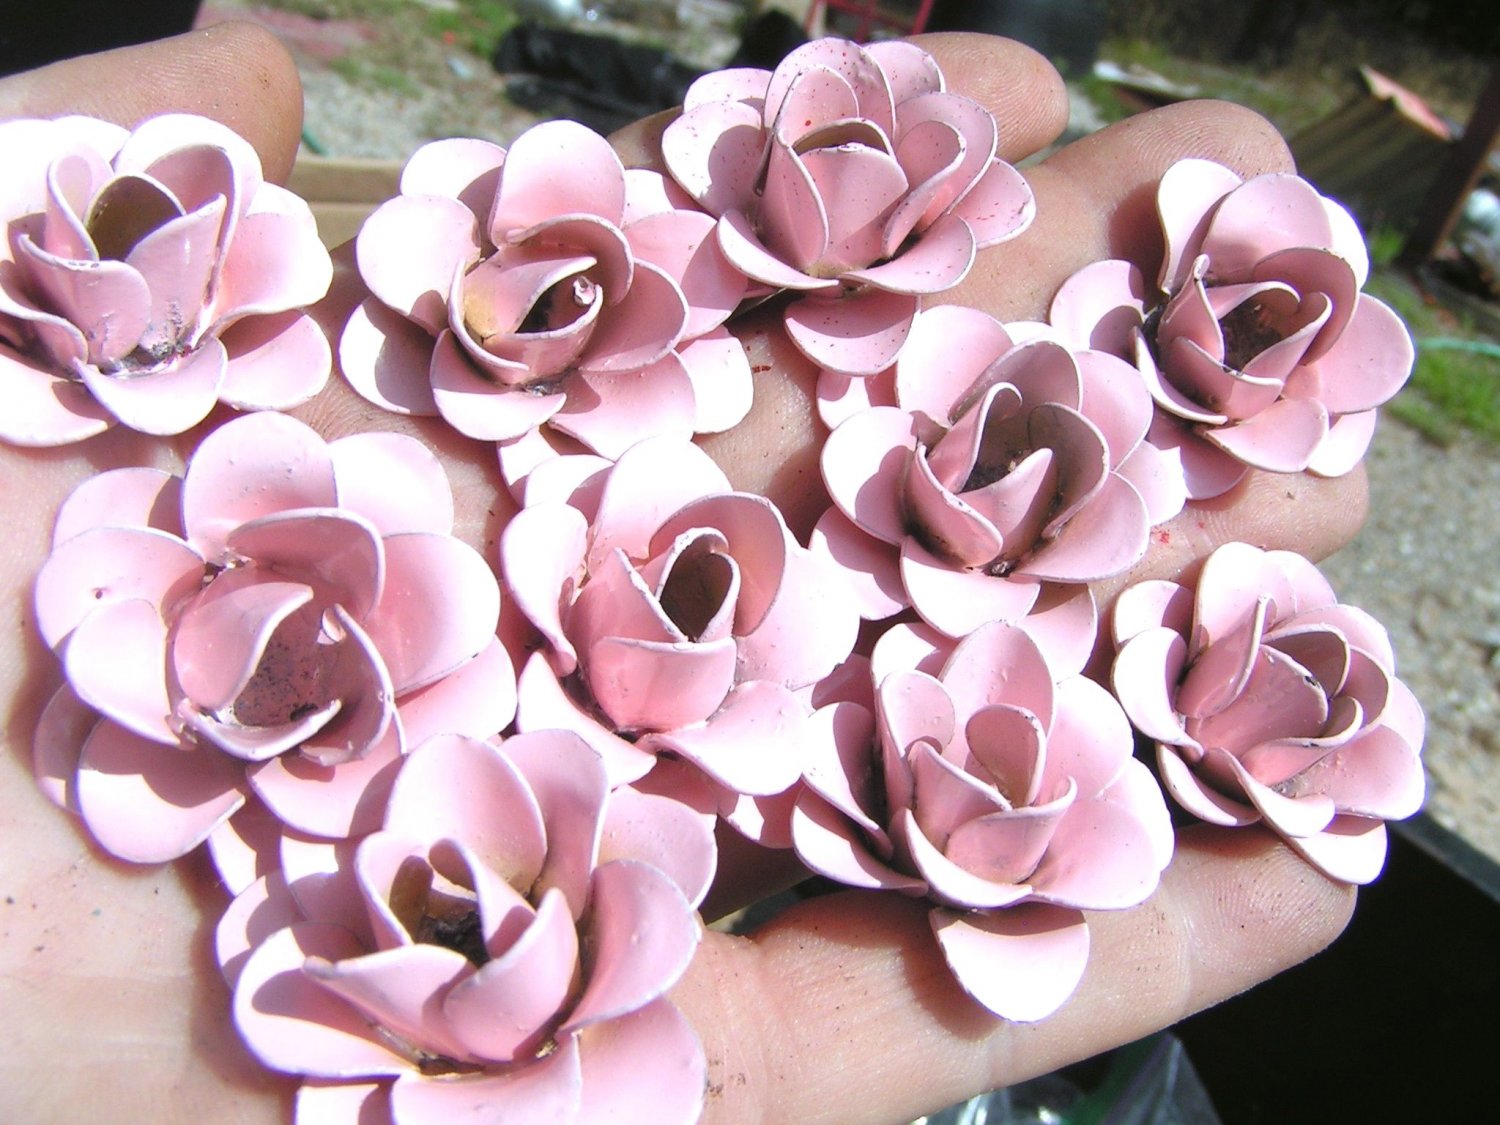 10 metal Pink roses flowers for accents, embellishments, crafting, woodworking, arrangements